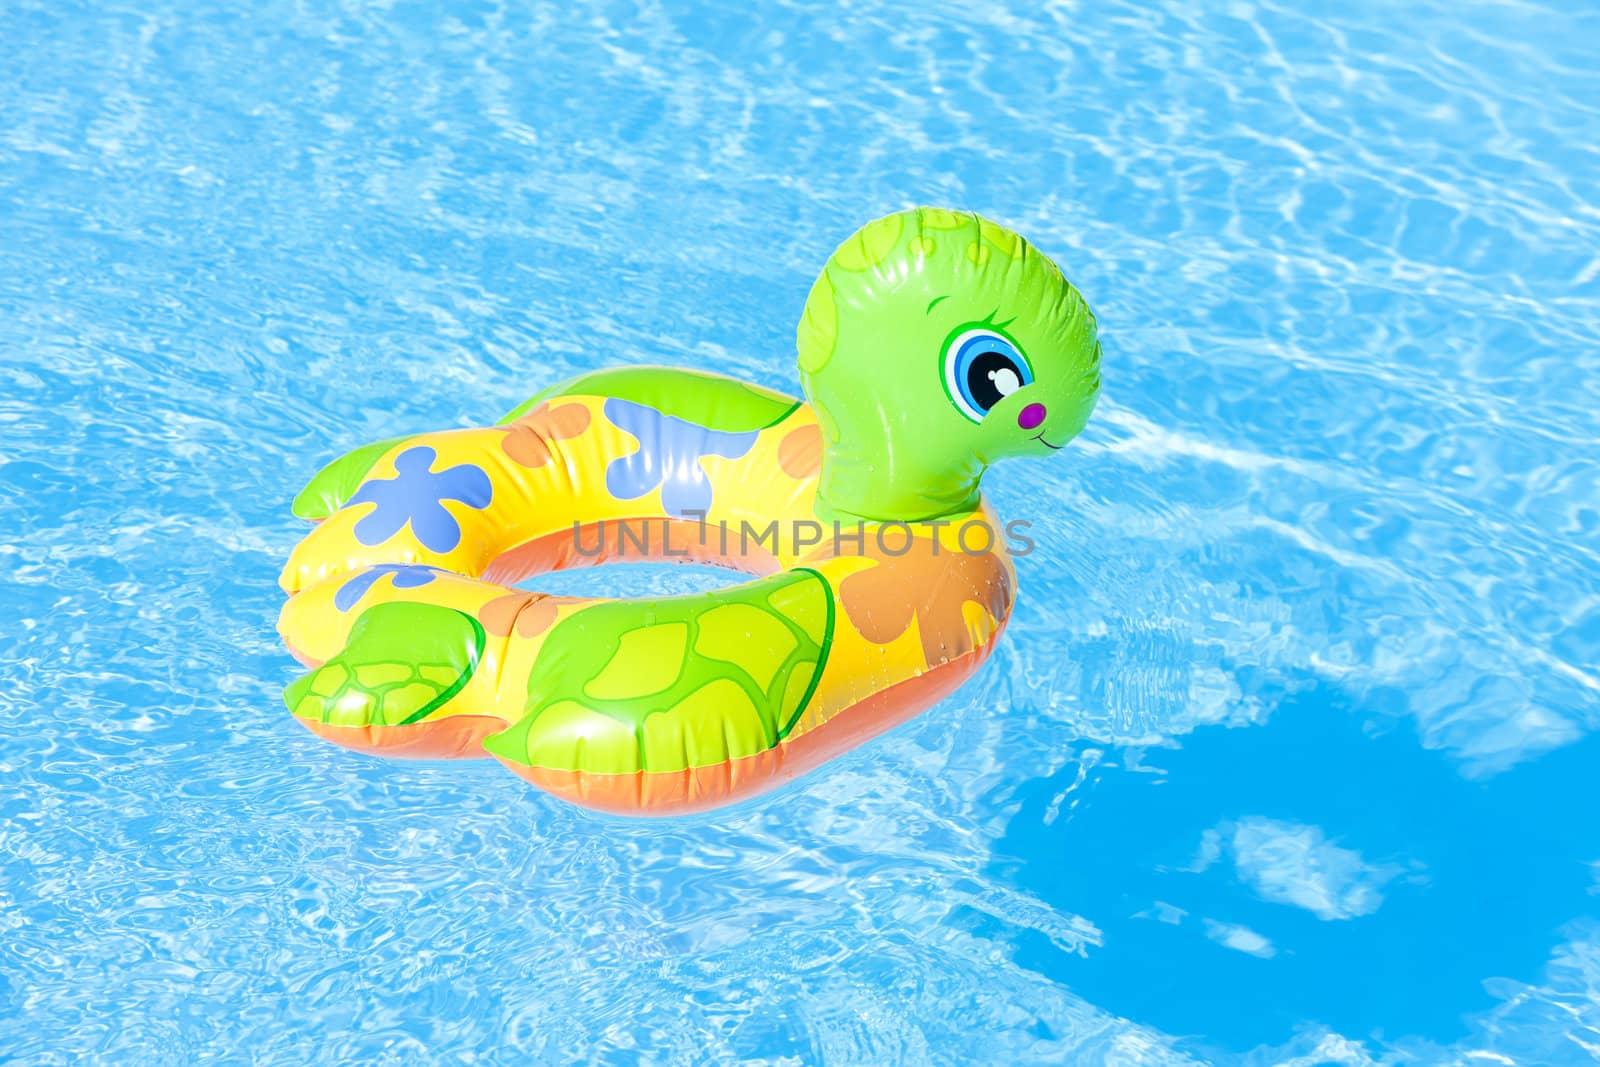 child's green rubber ring in swimming pool by phbcz